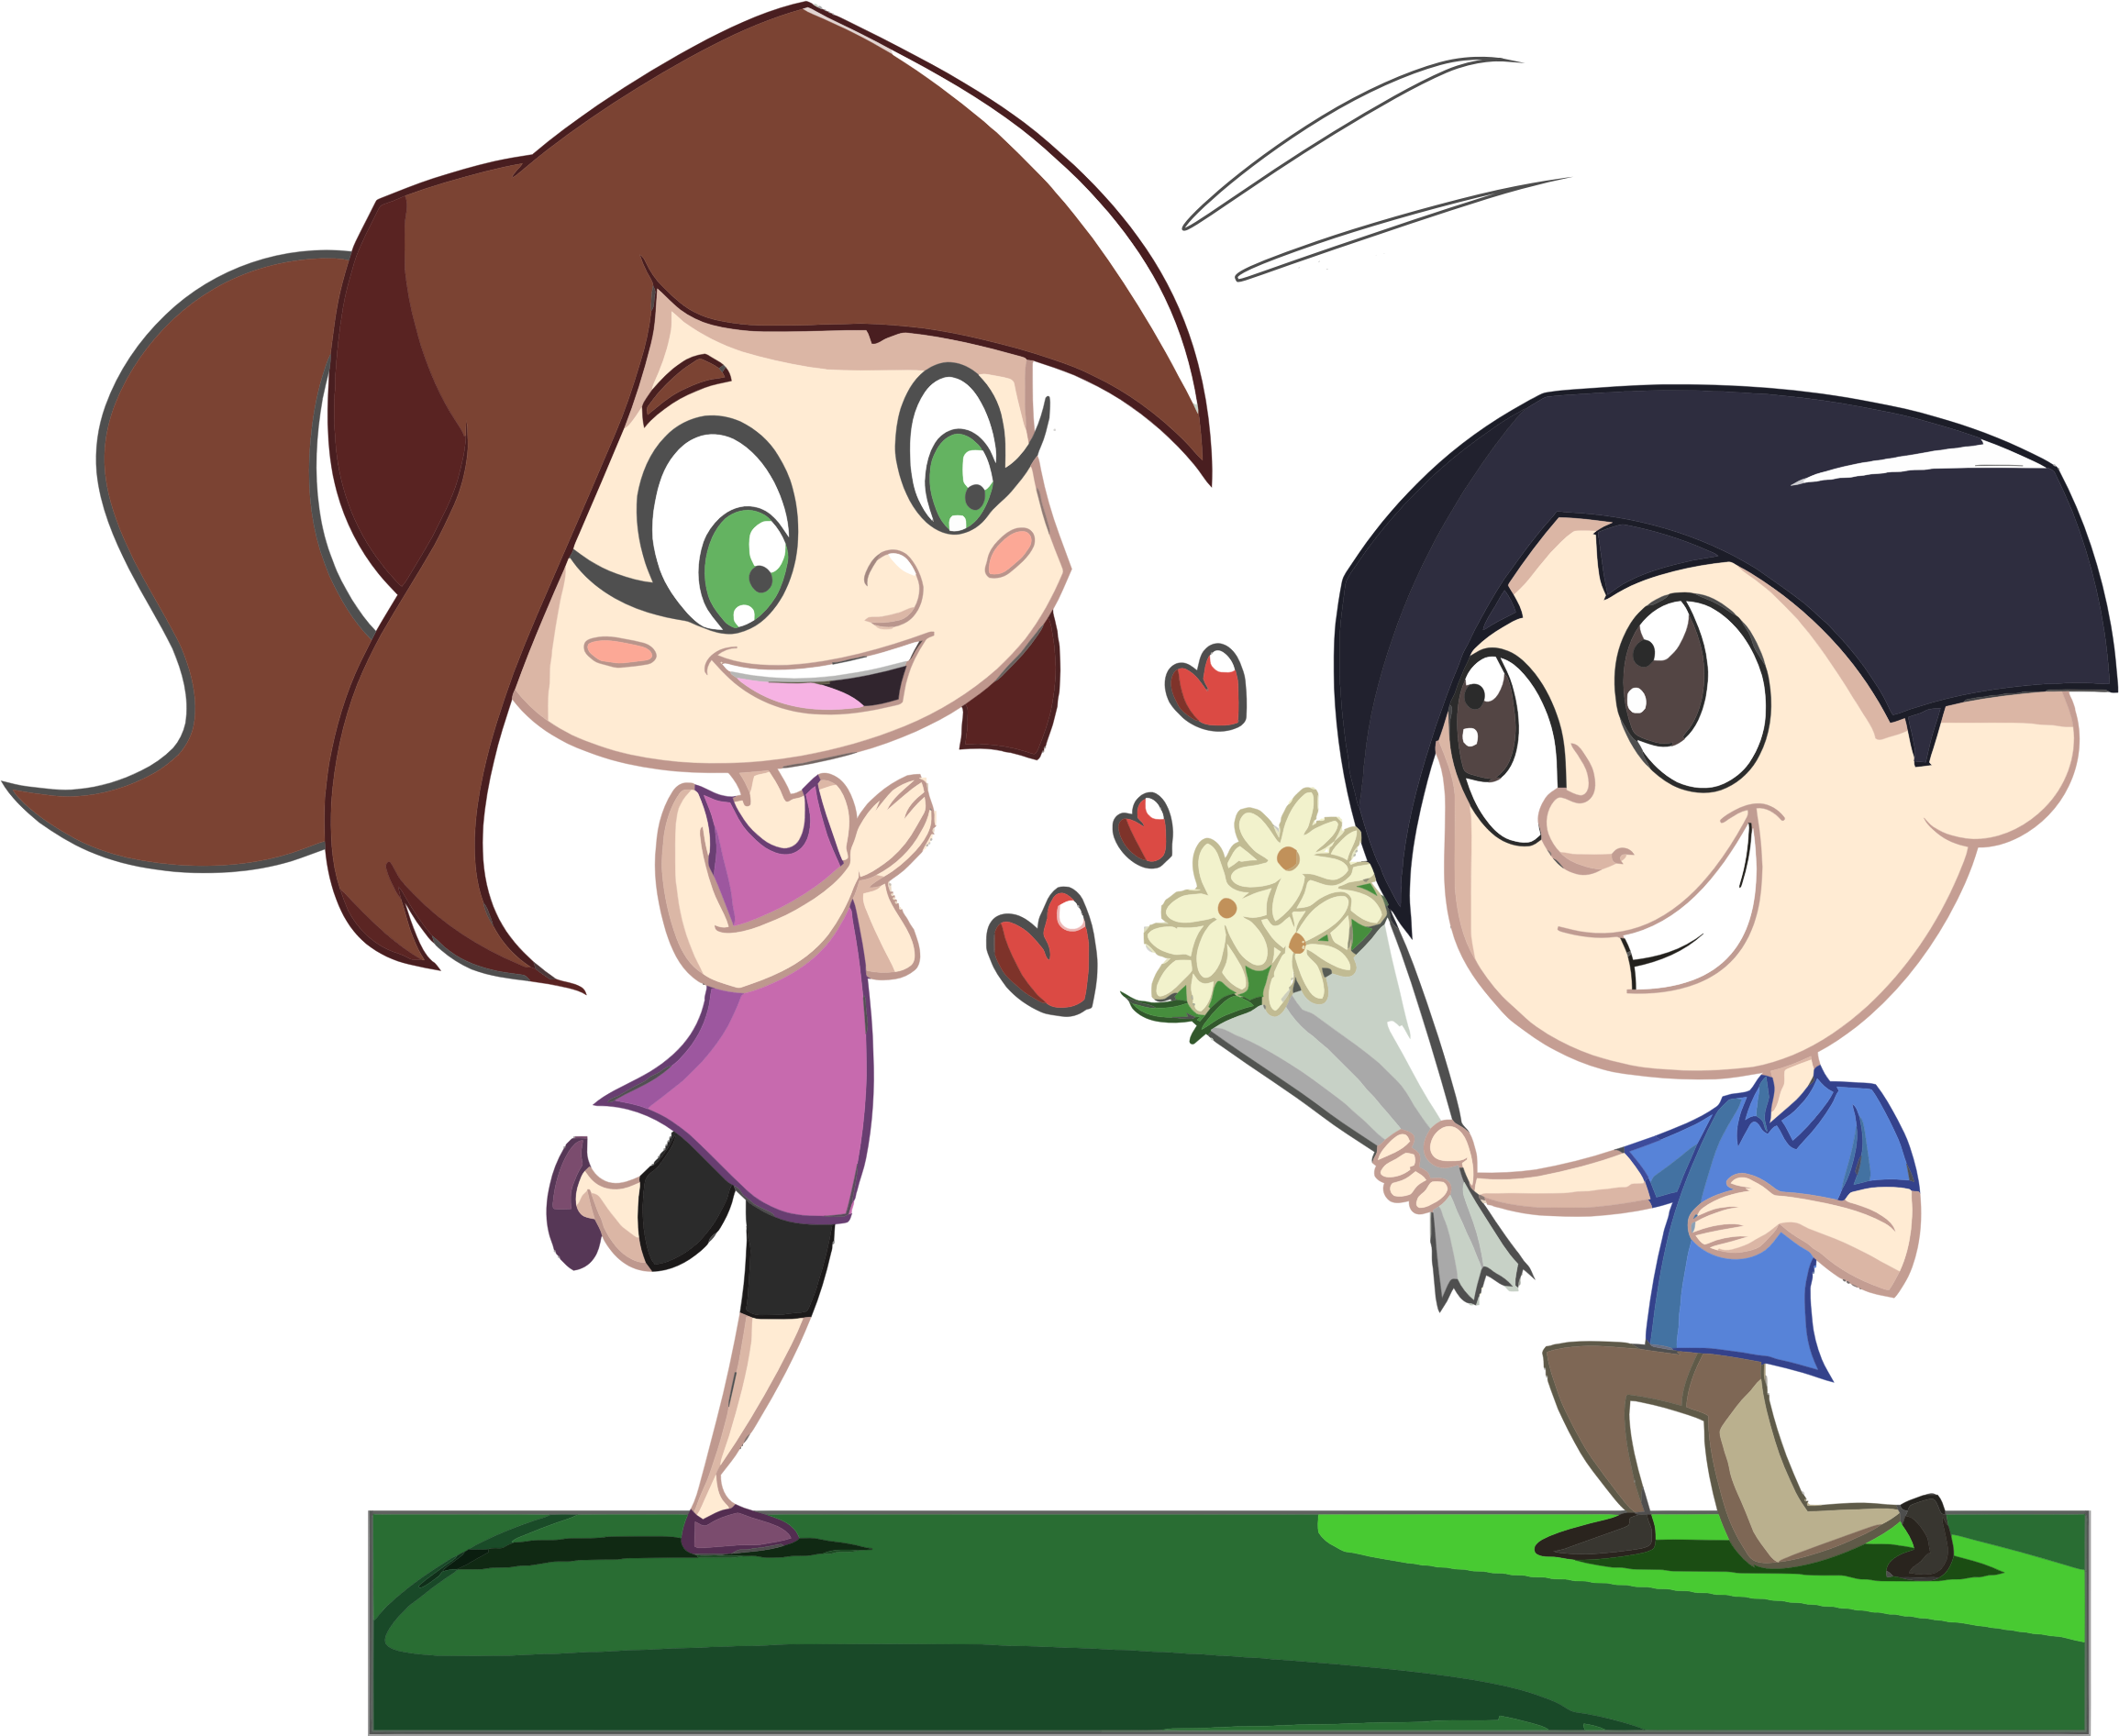 Clipart roses giving. Boy flowers to girl